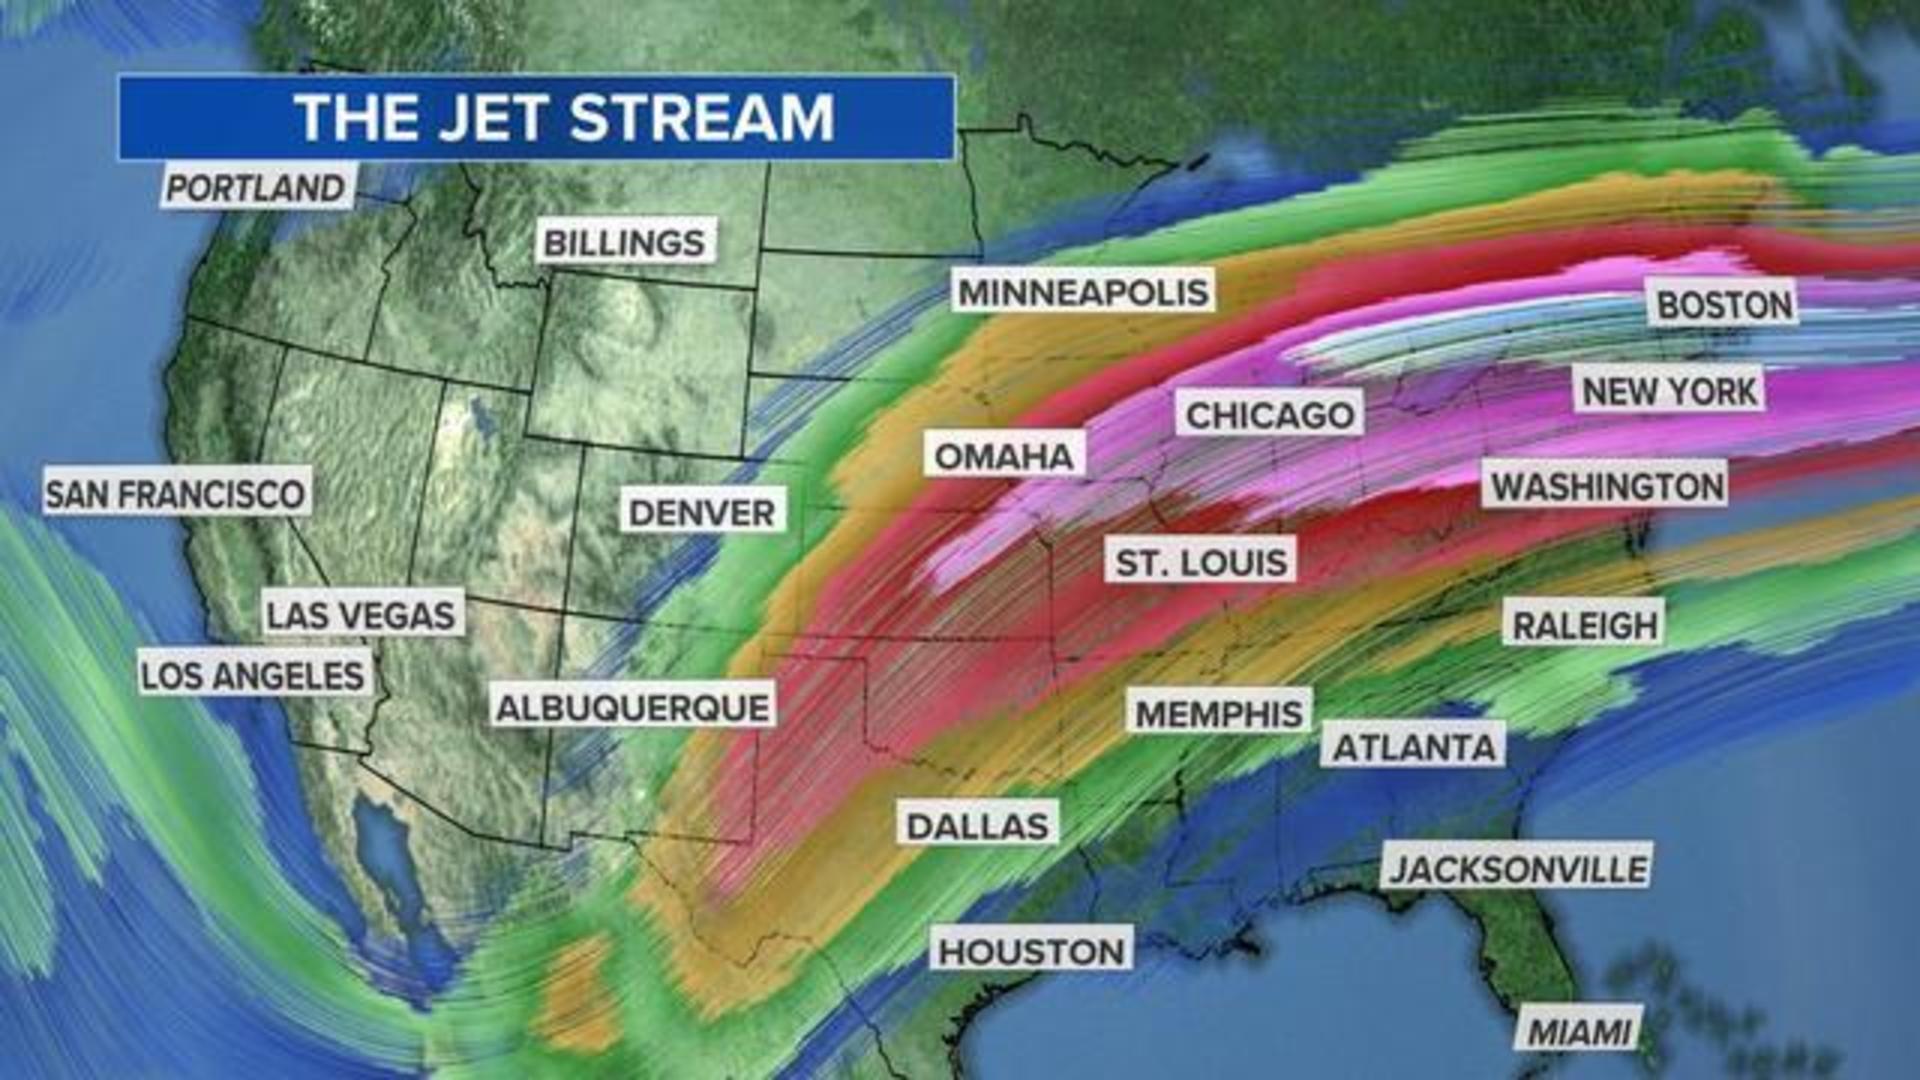 Winter and the Jet Stream